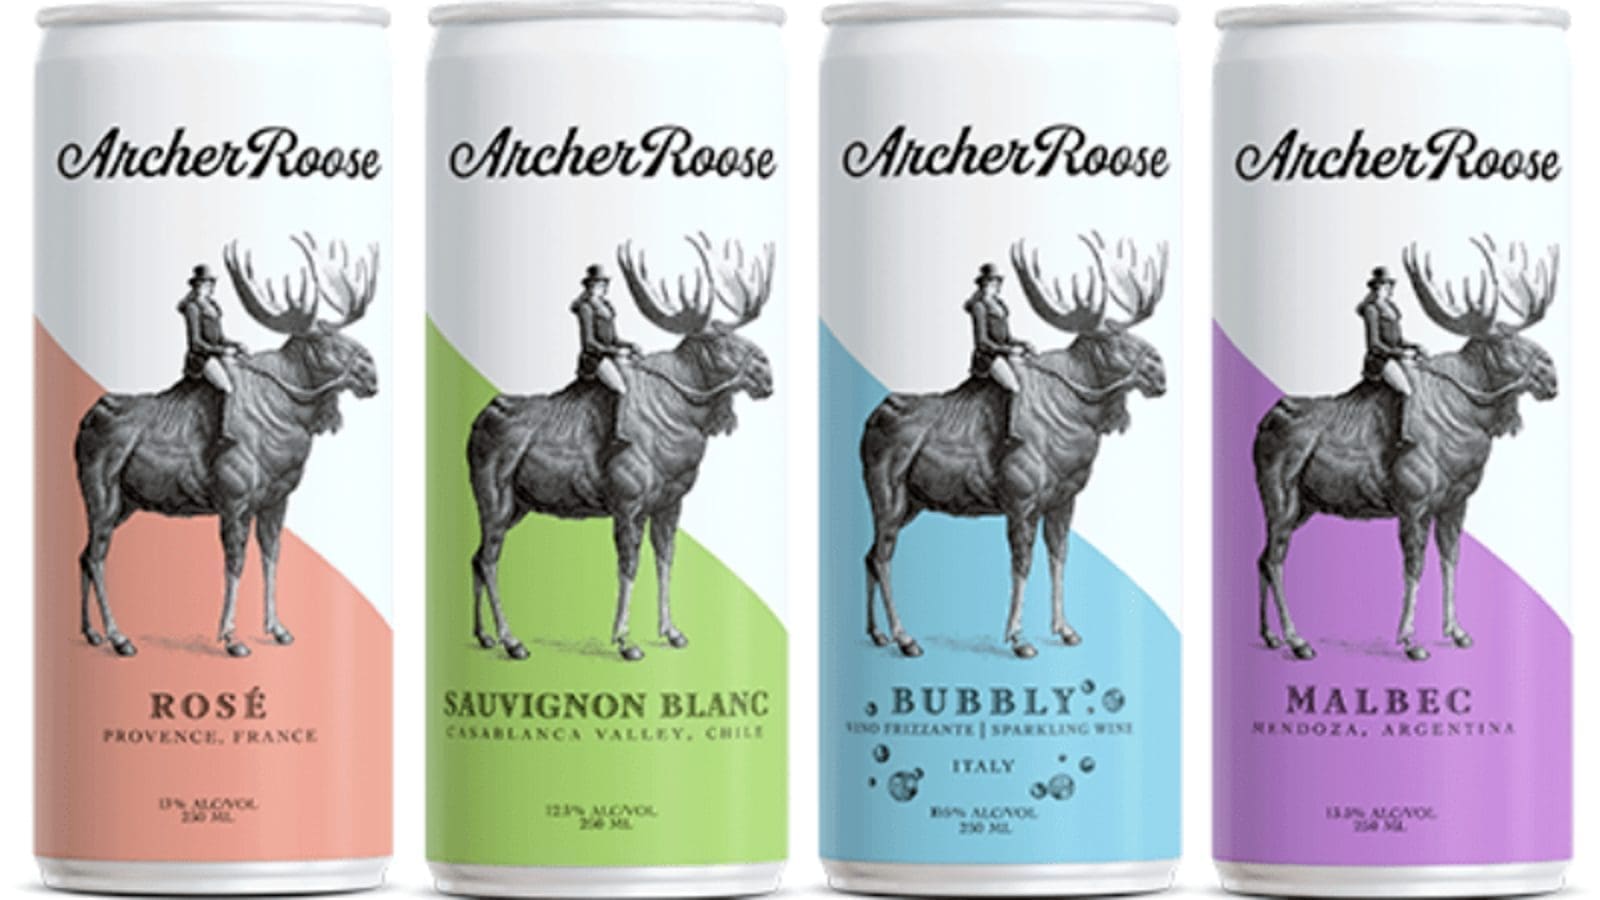 Constellation Brands further expands reach in RTD beverages with acquisition of minority stake in Archer Roose wine brand